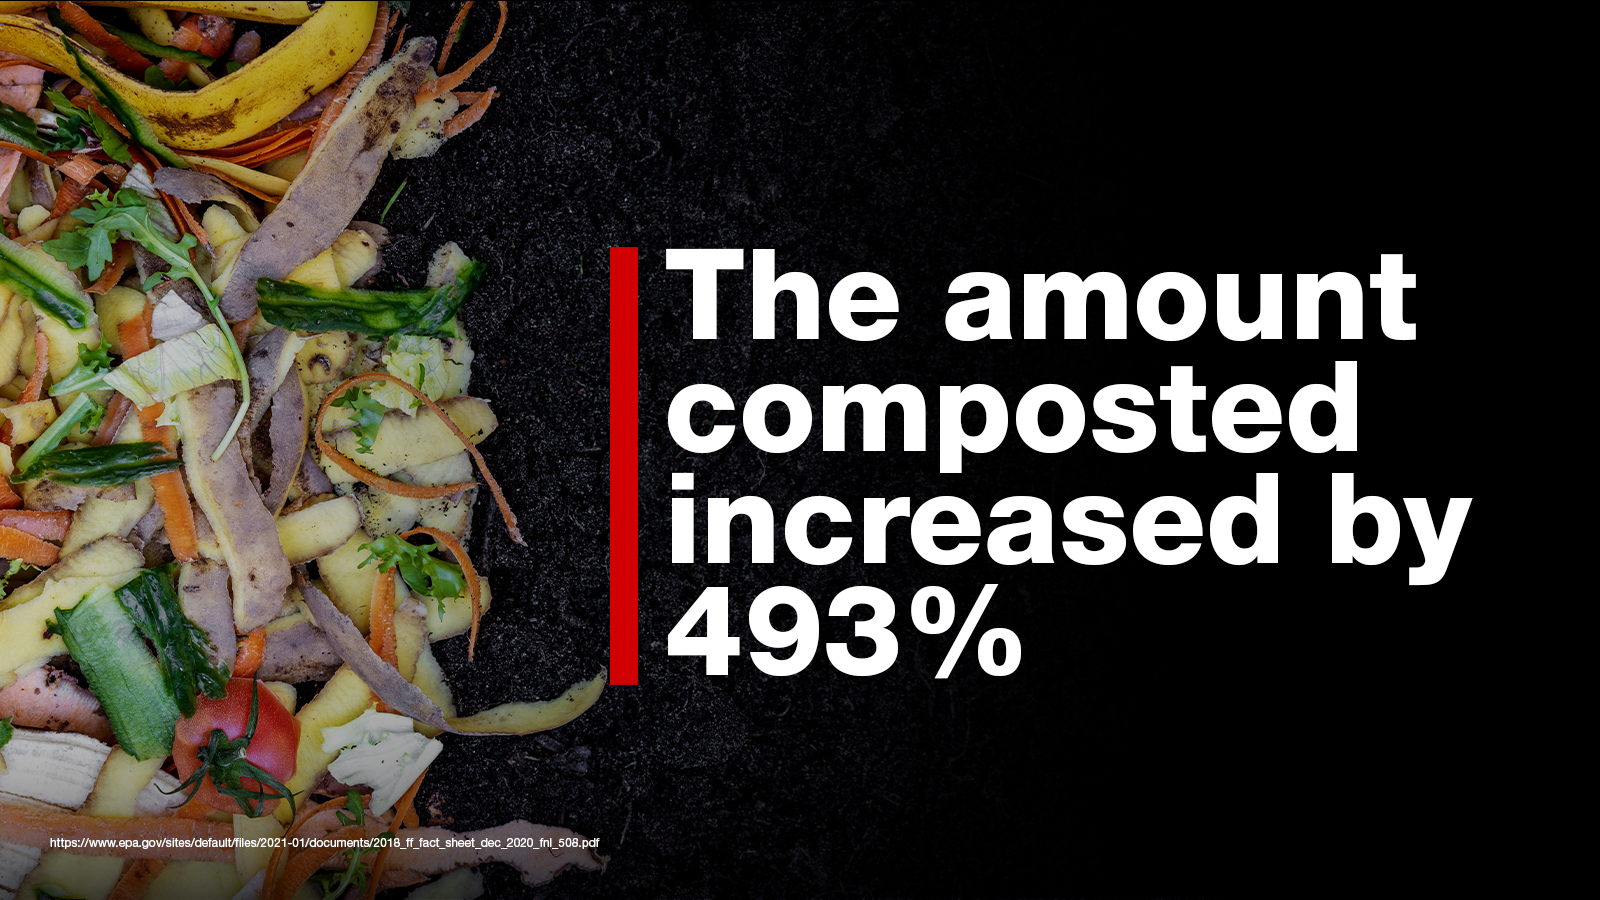 The amount composted increased by 493%